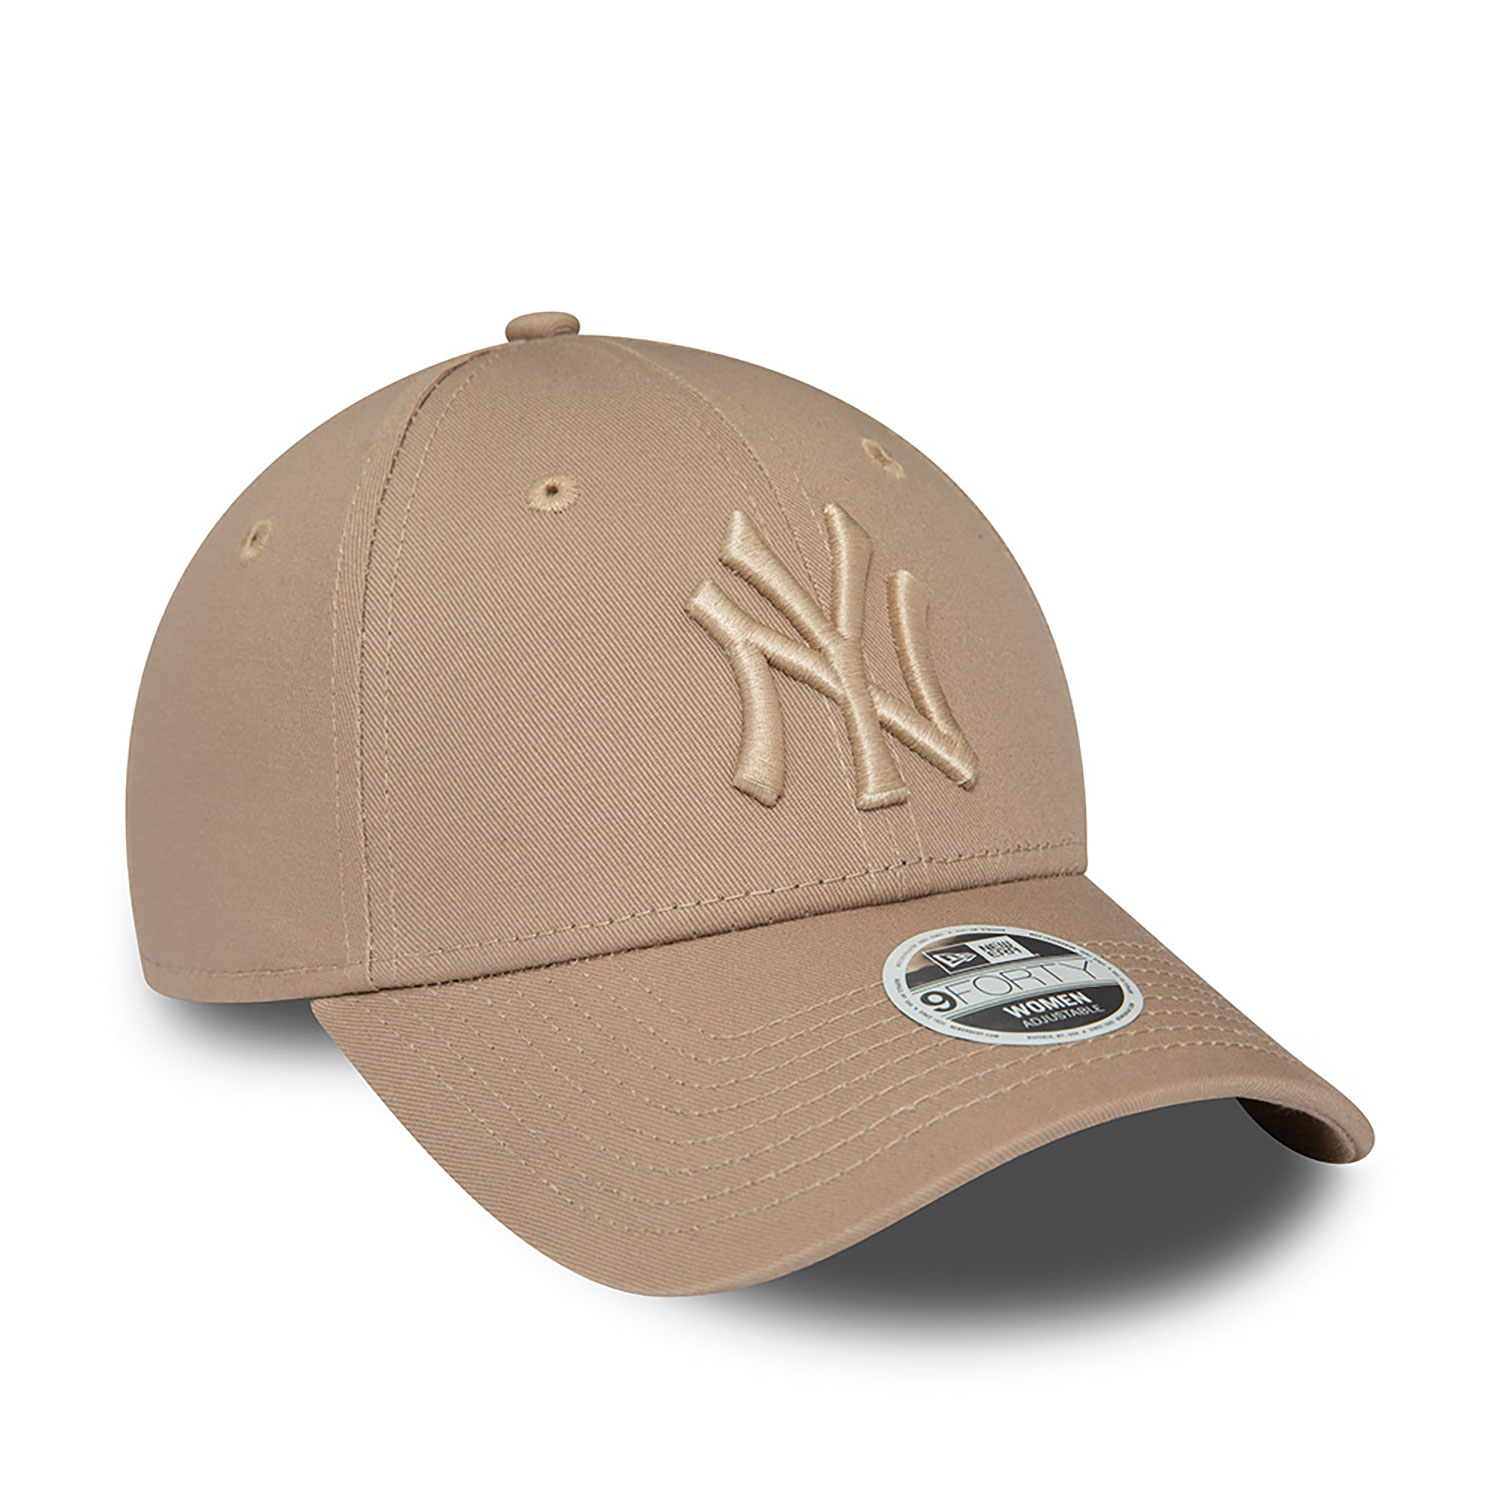 New York Yankees Womens League Essential Brown 9FORTY Adjustable Cap